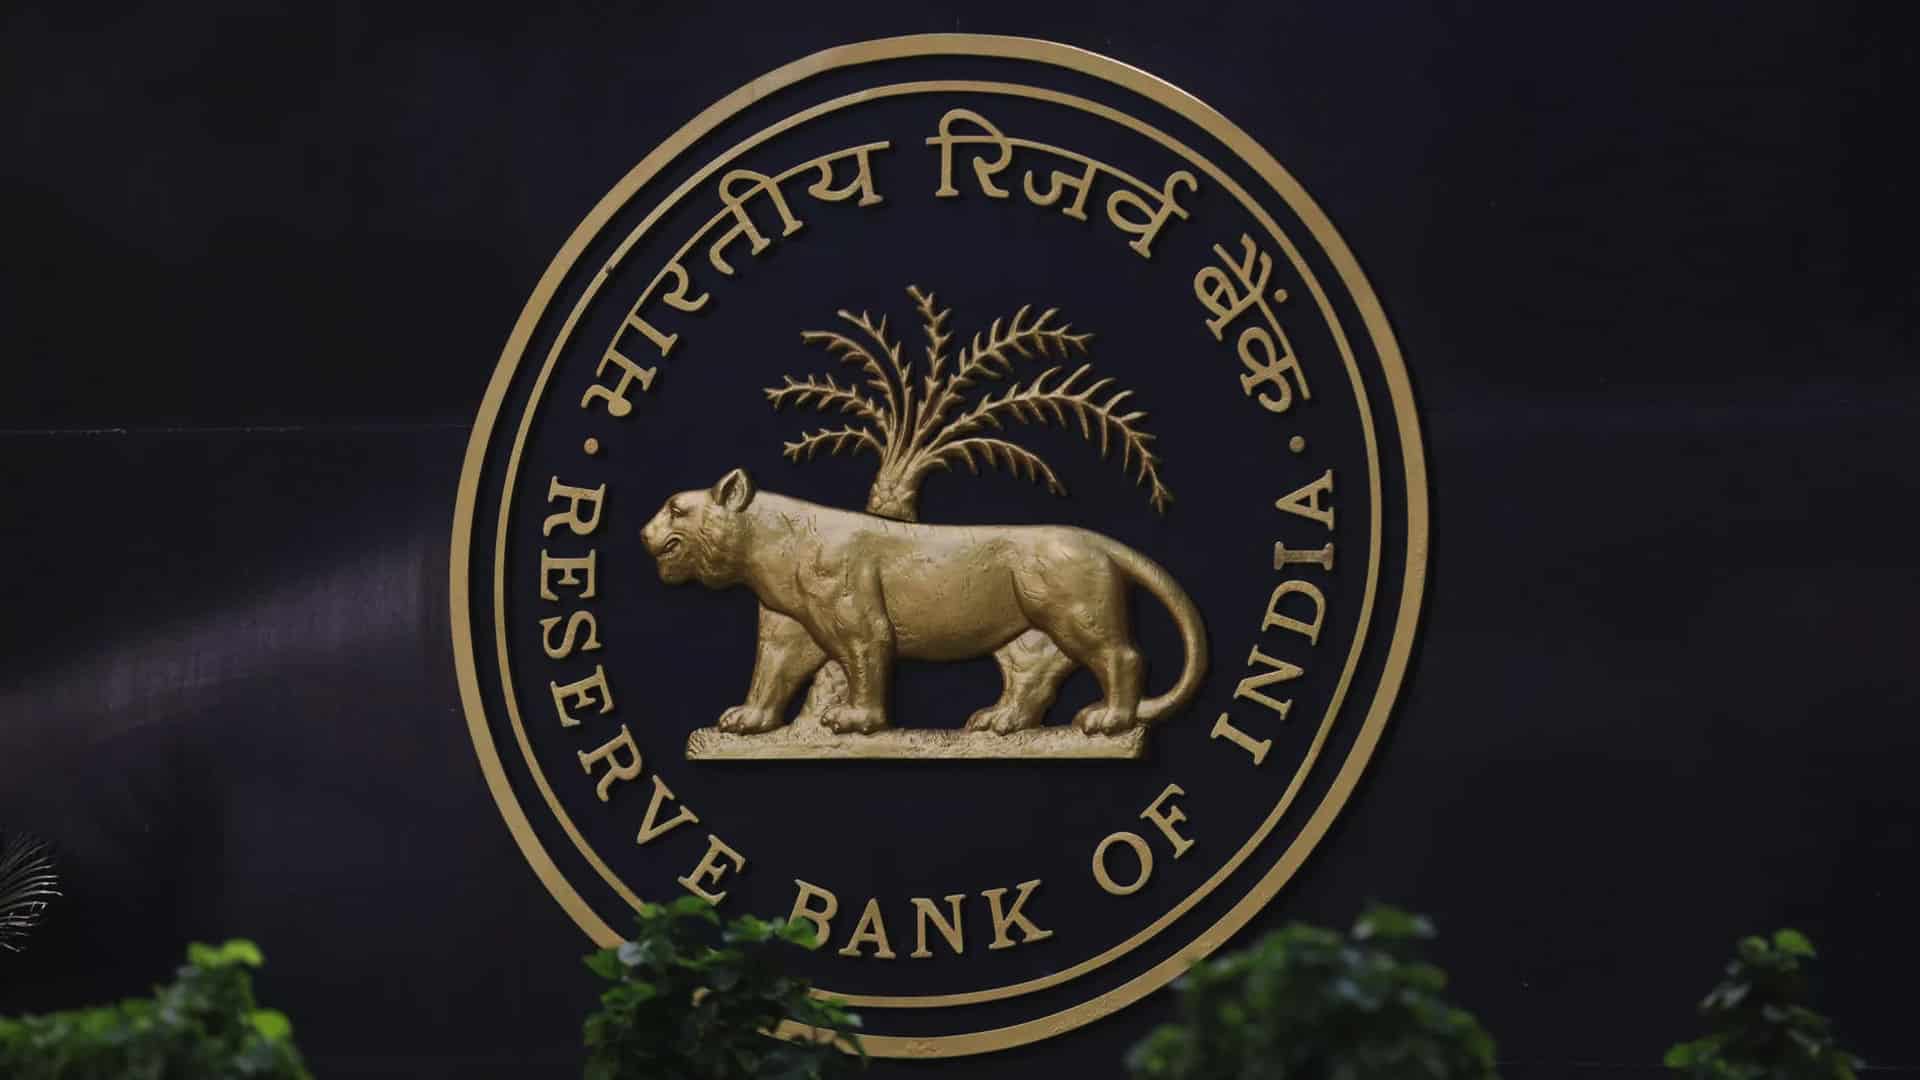 Inflation slowing down personal consumption, affecting pvt investment: RBI paper